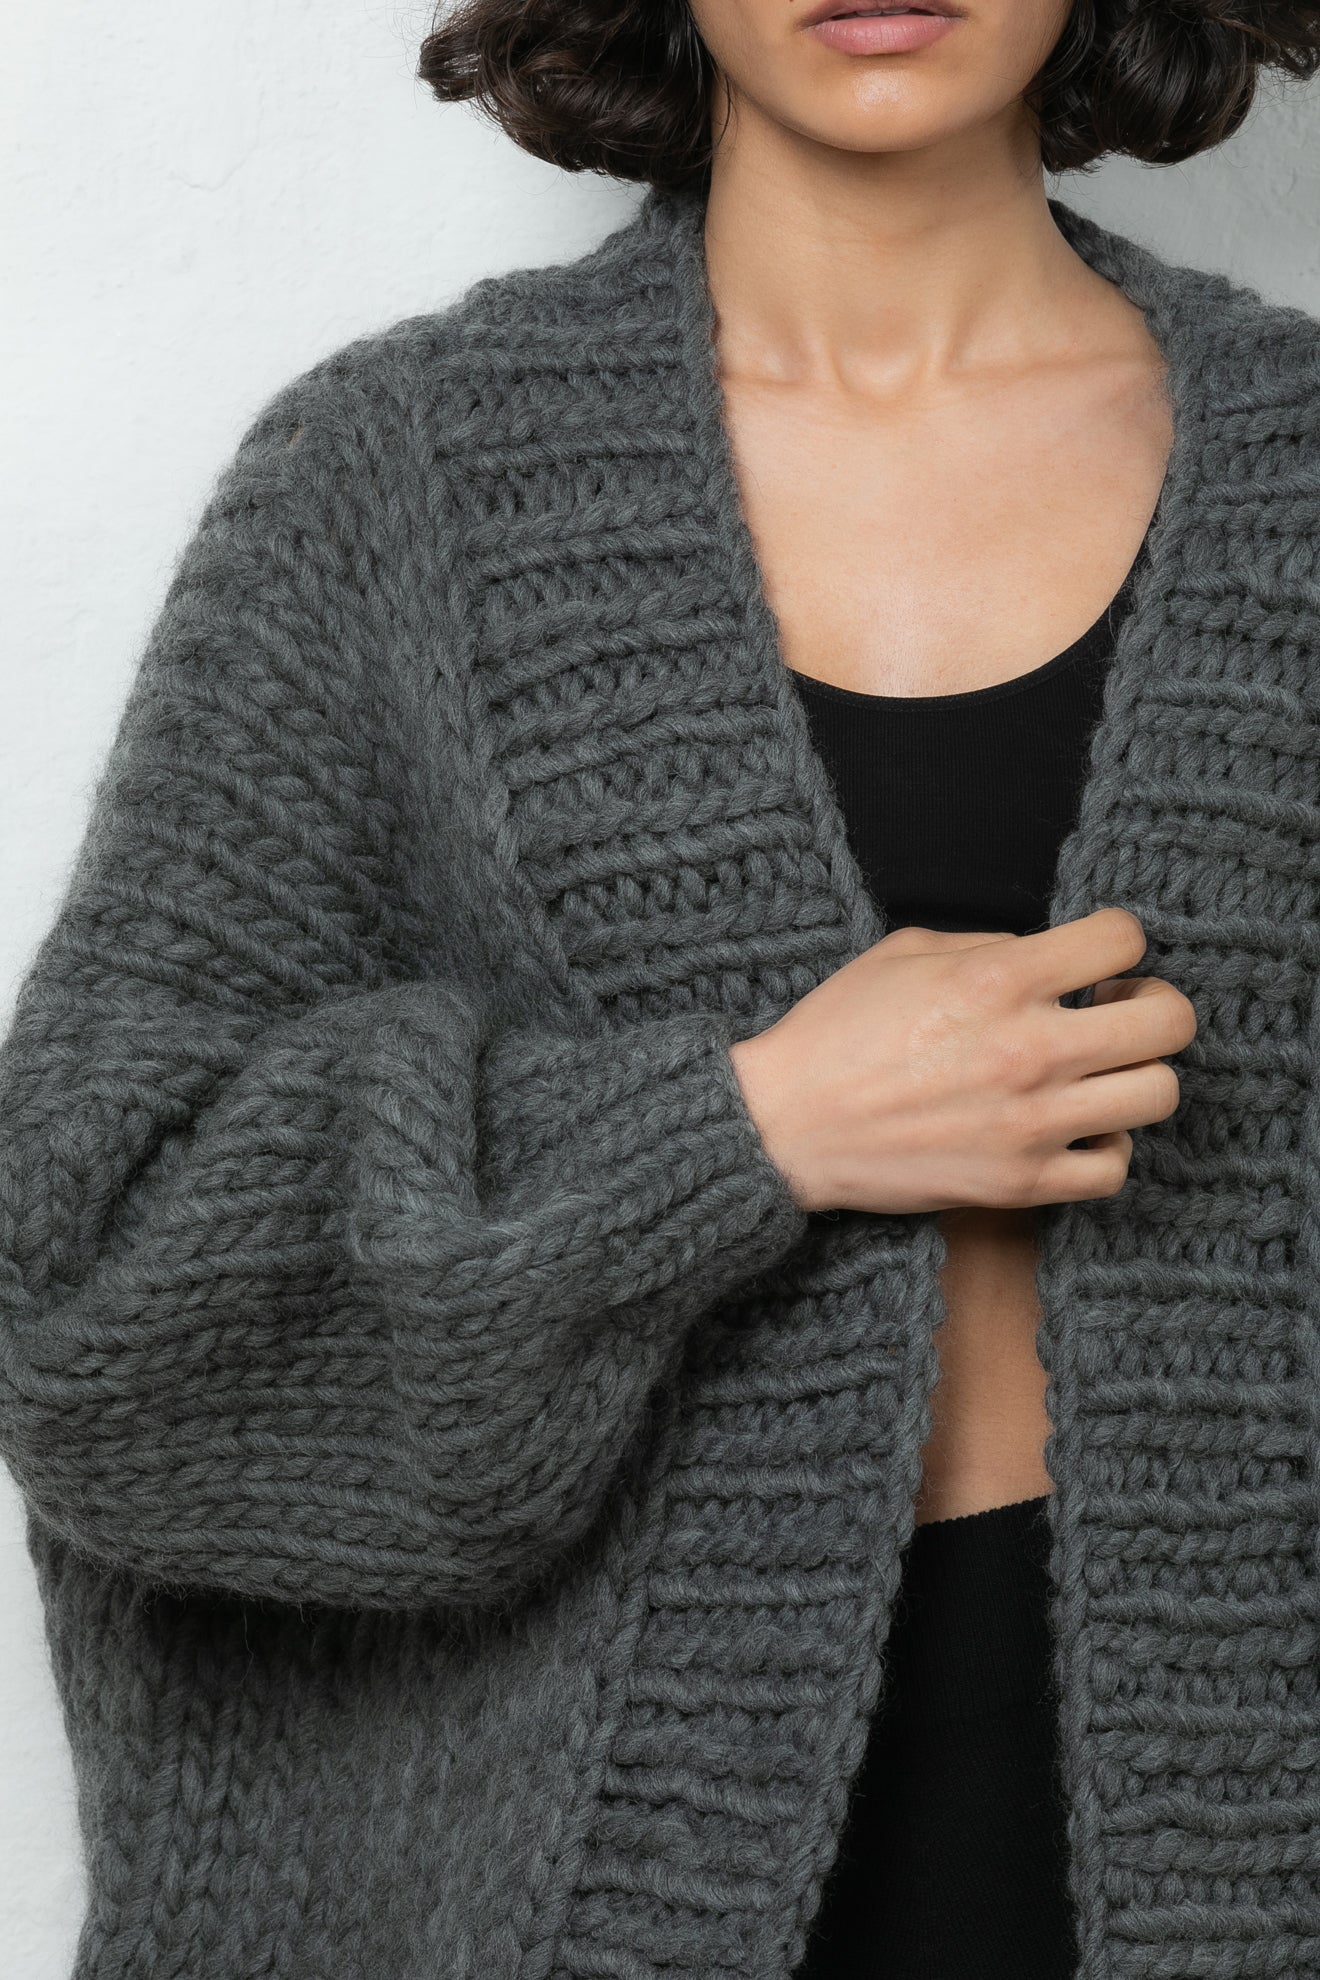 charcoal dark grey cardigan chunky mr mittens knit knitwear winter collection outerwear